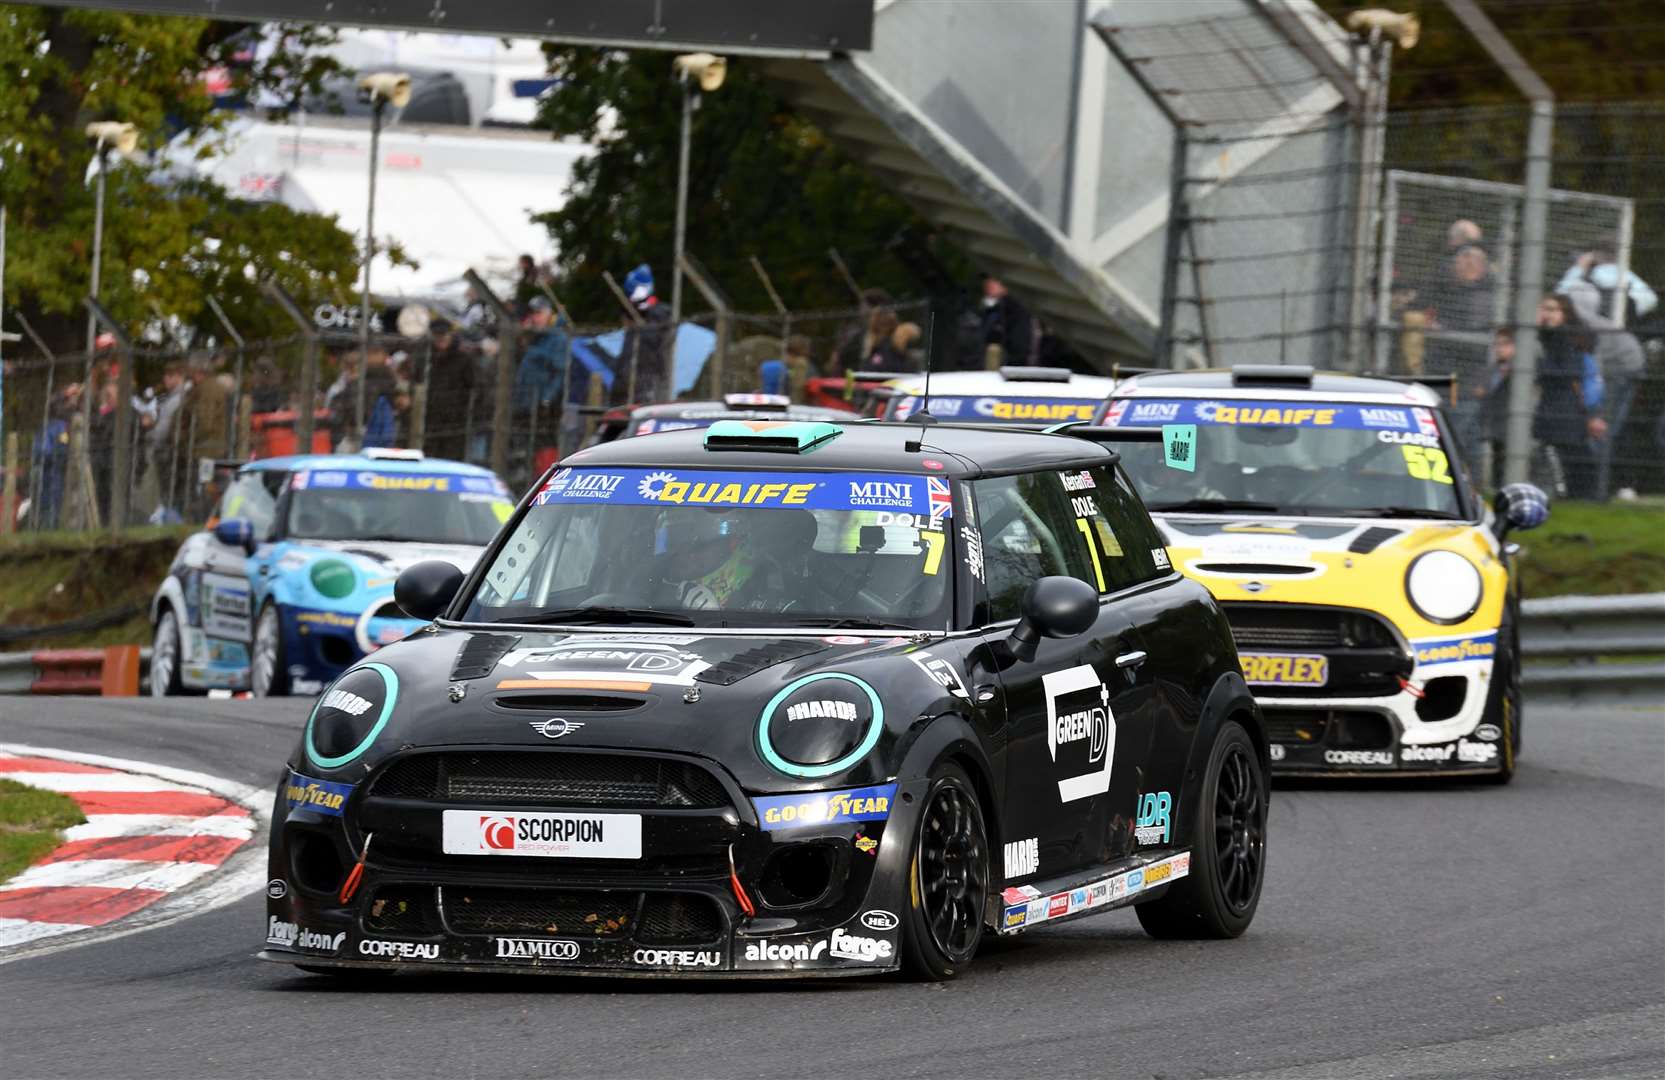 Kenan Dole, from Dartford, finished sixth twice and 16th in the three Mini Challenge races. He finished 14th overall in the championship and sixth in the graduate cup category